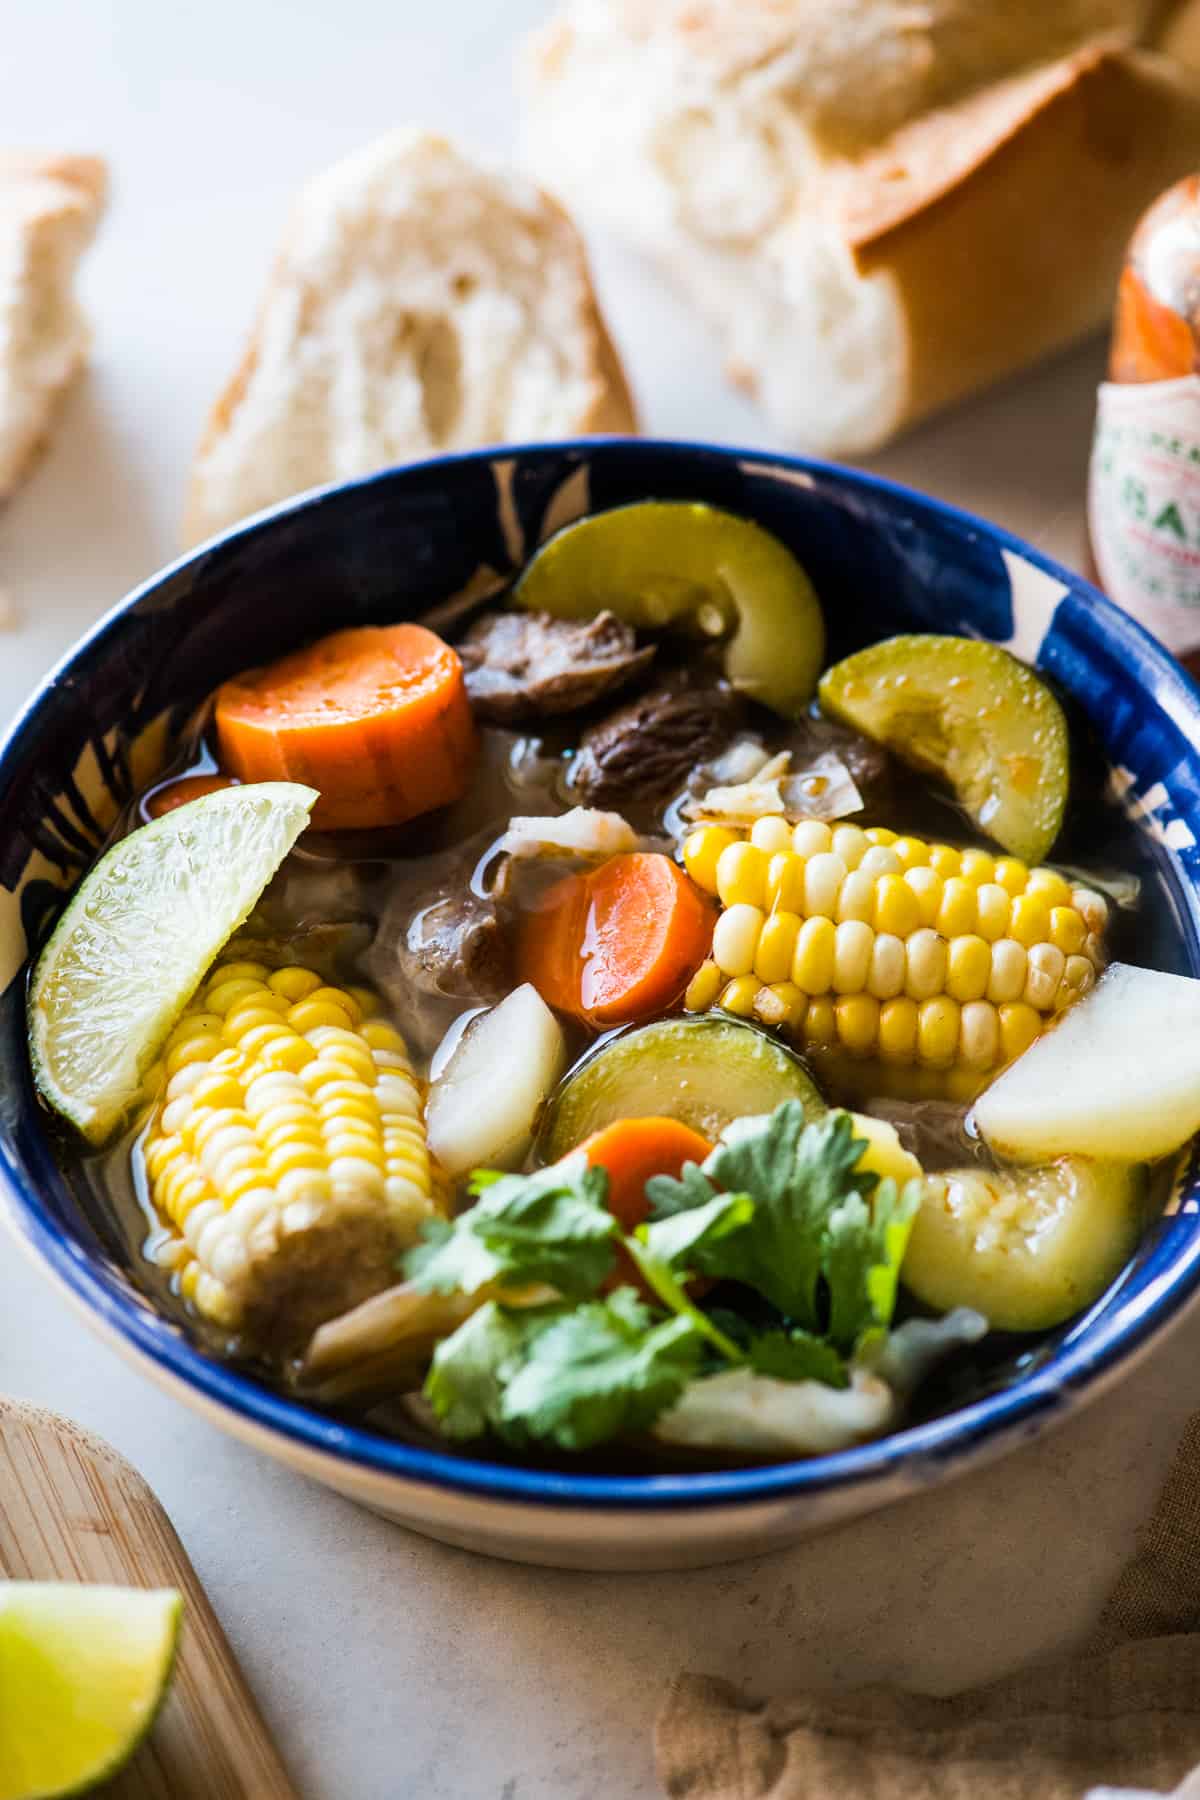 Caldo de Res in a bowl served with chunks of carrot, zucchini, potatoes, cilantro, and more.